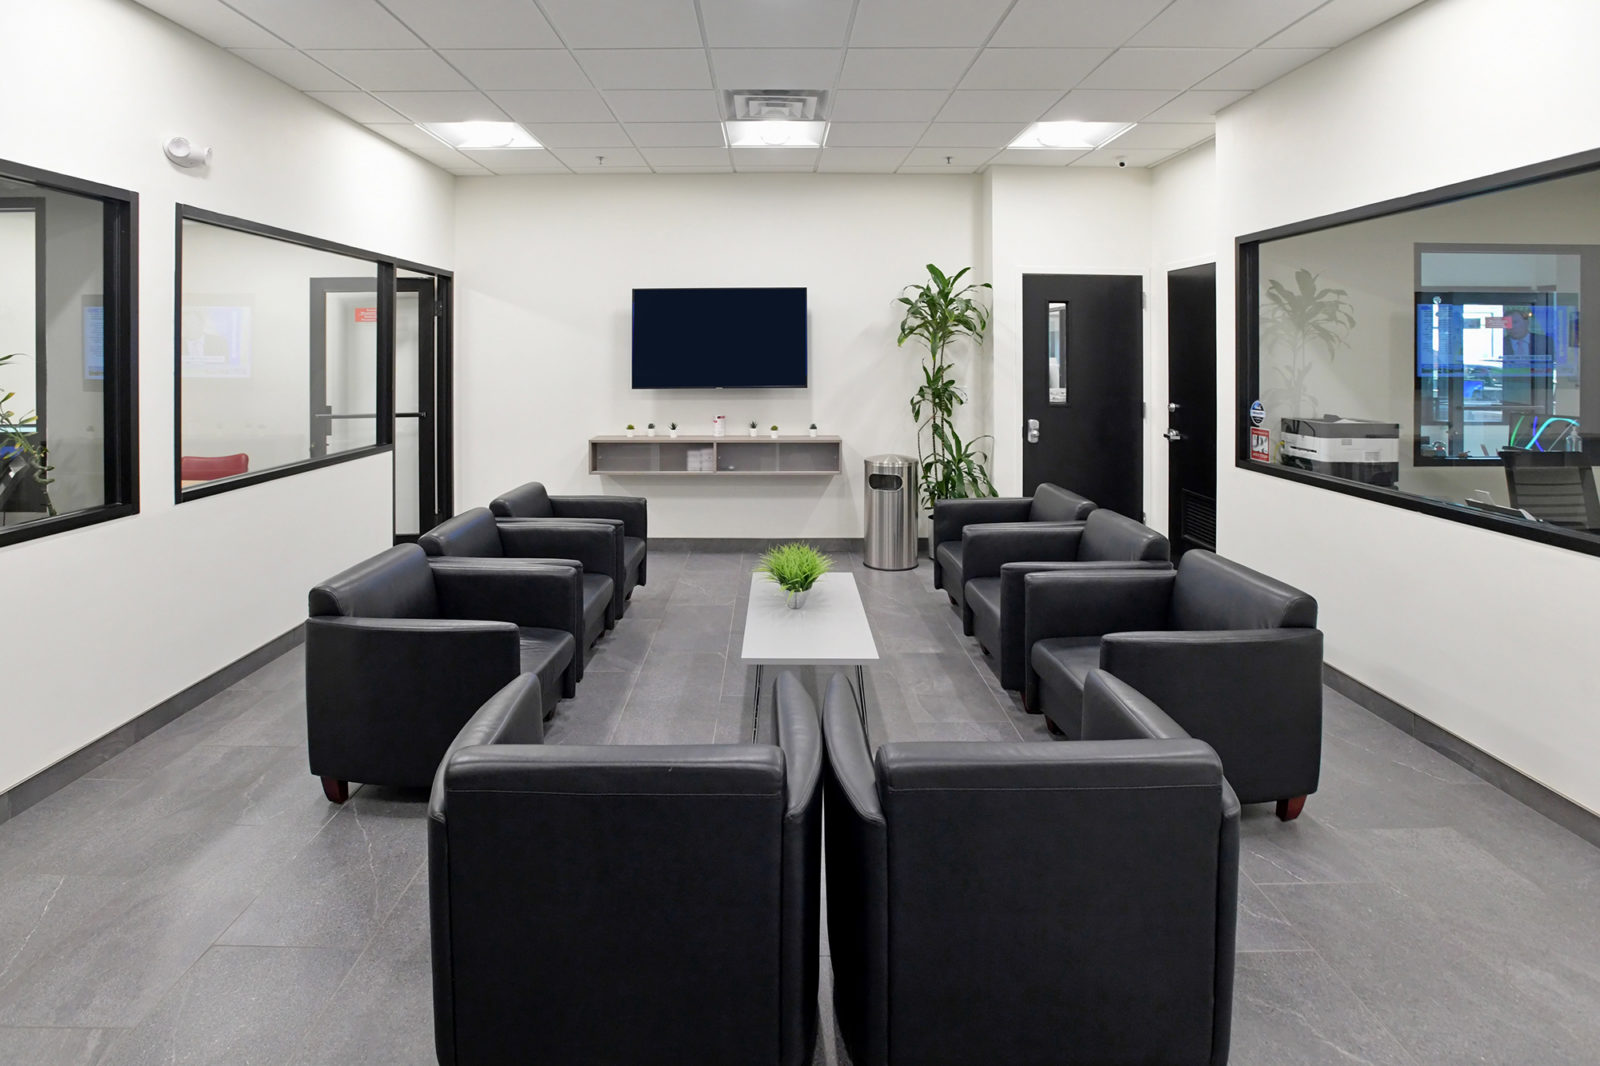 Waiting area with individual black leather club chairs creating a U-shape area.